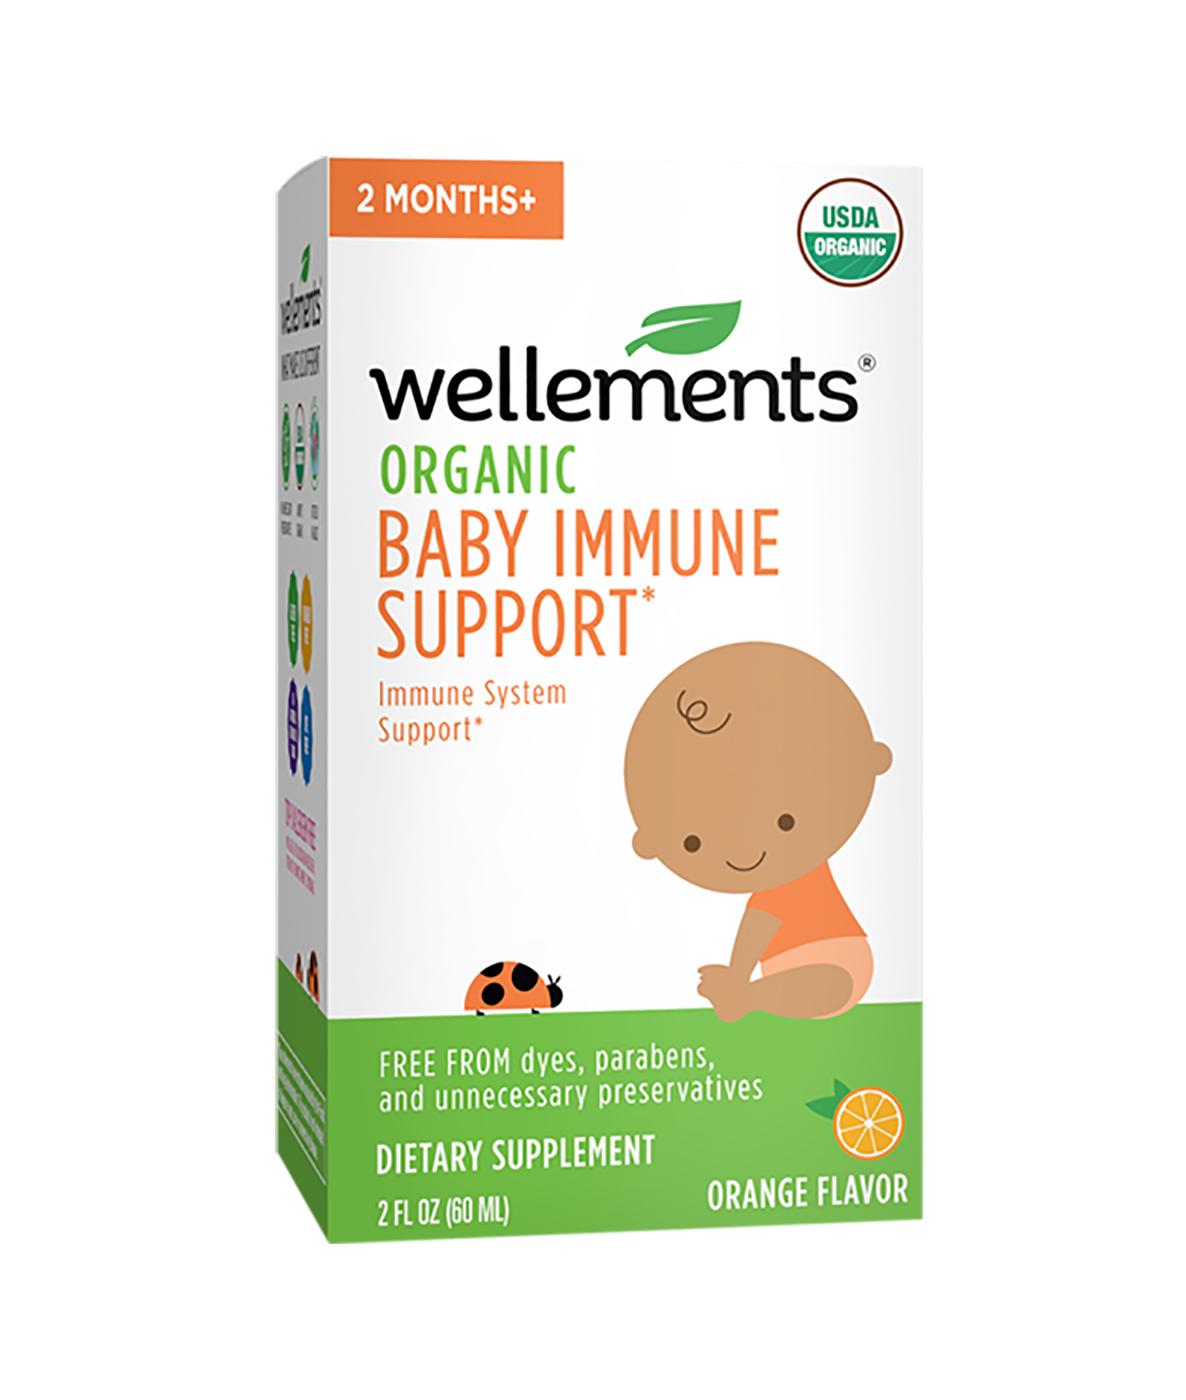 Wellements Organic Baby Immune Support; image 1 of 2